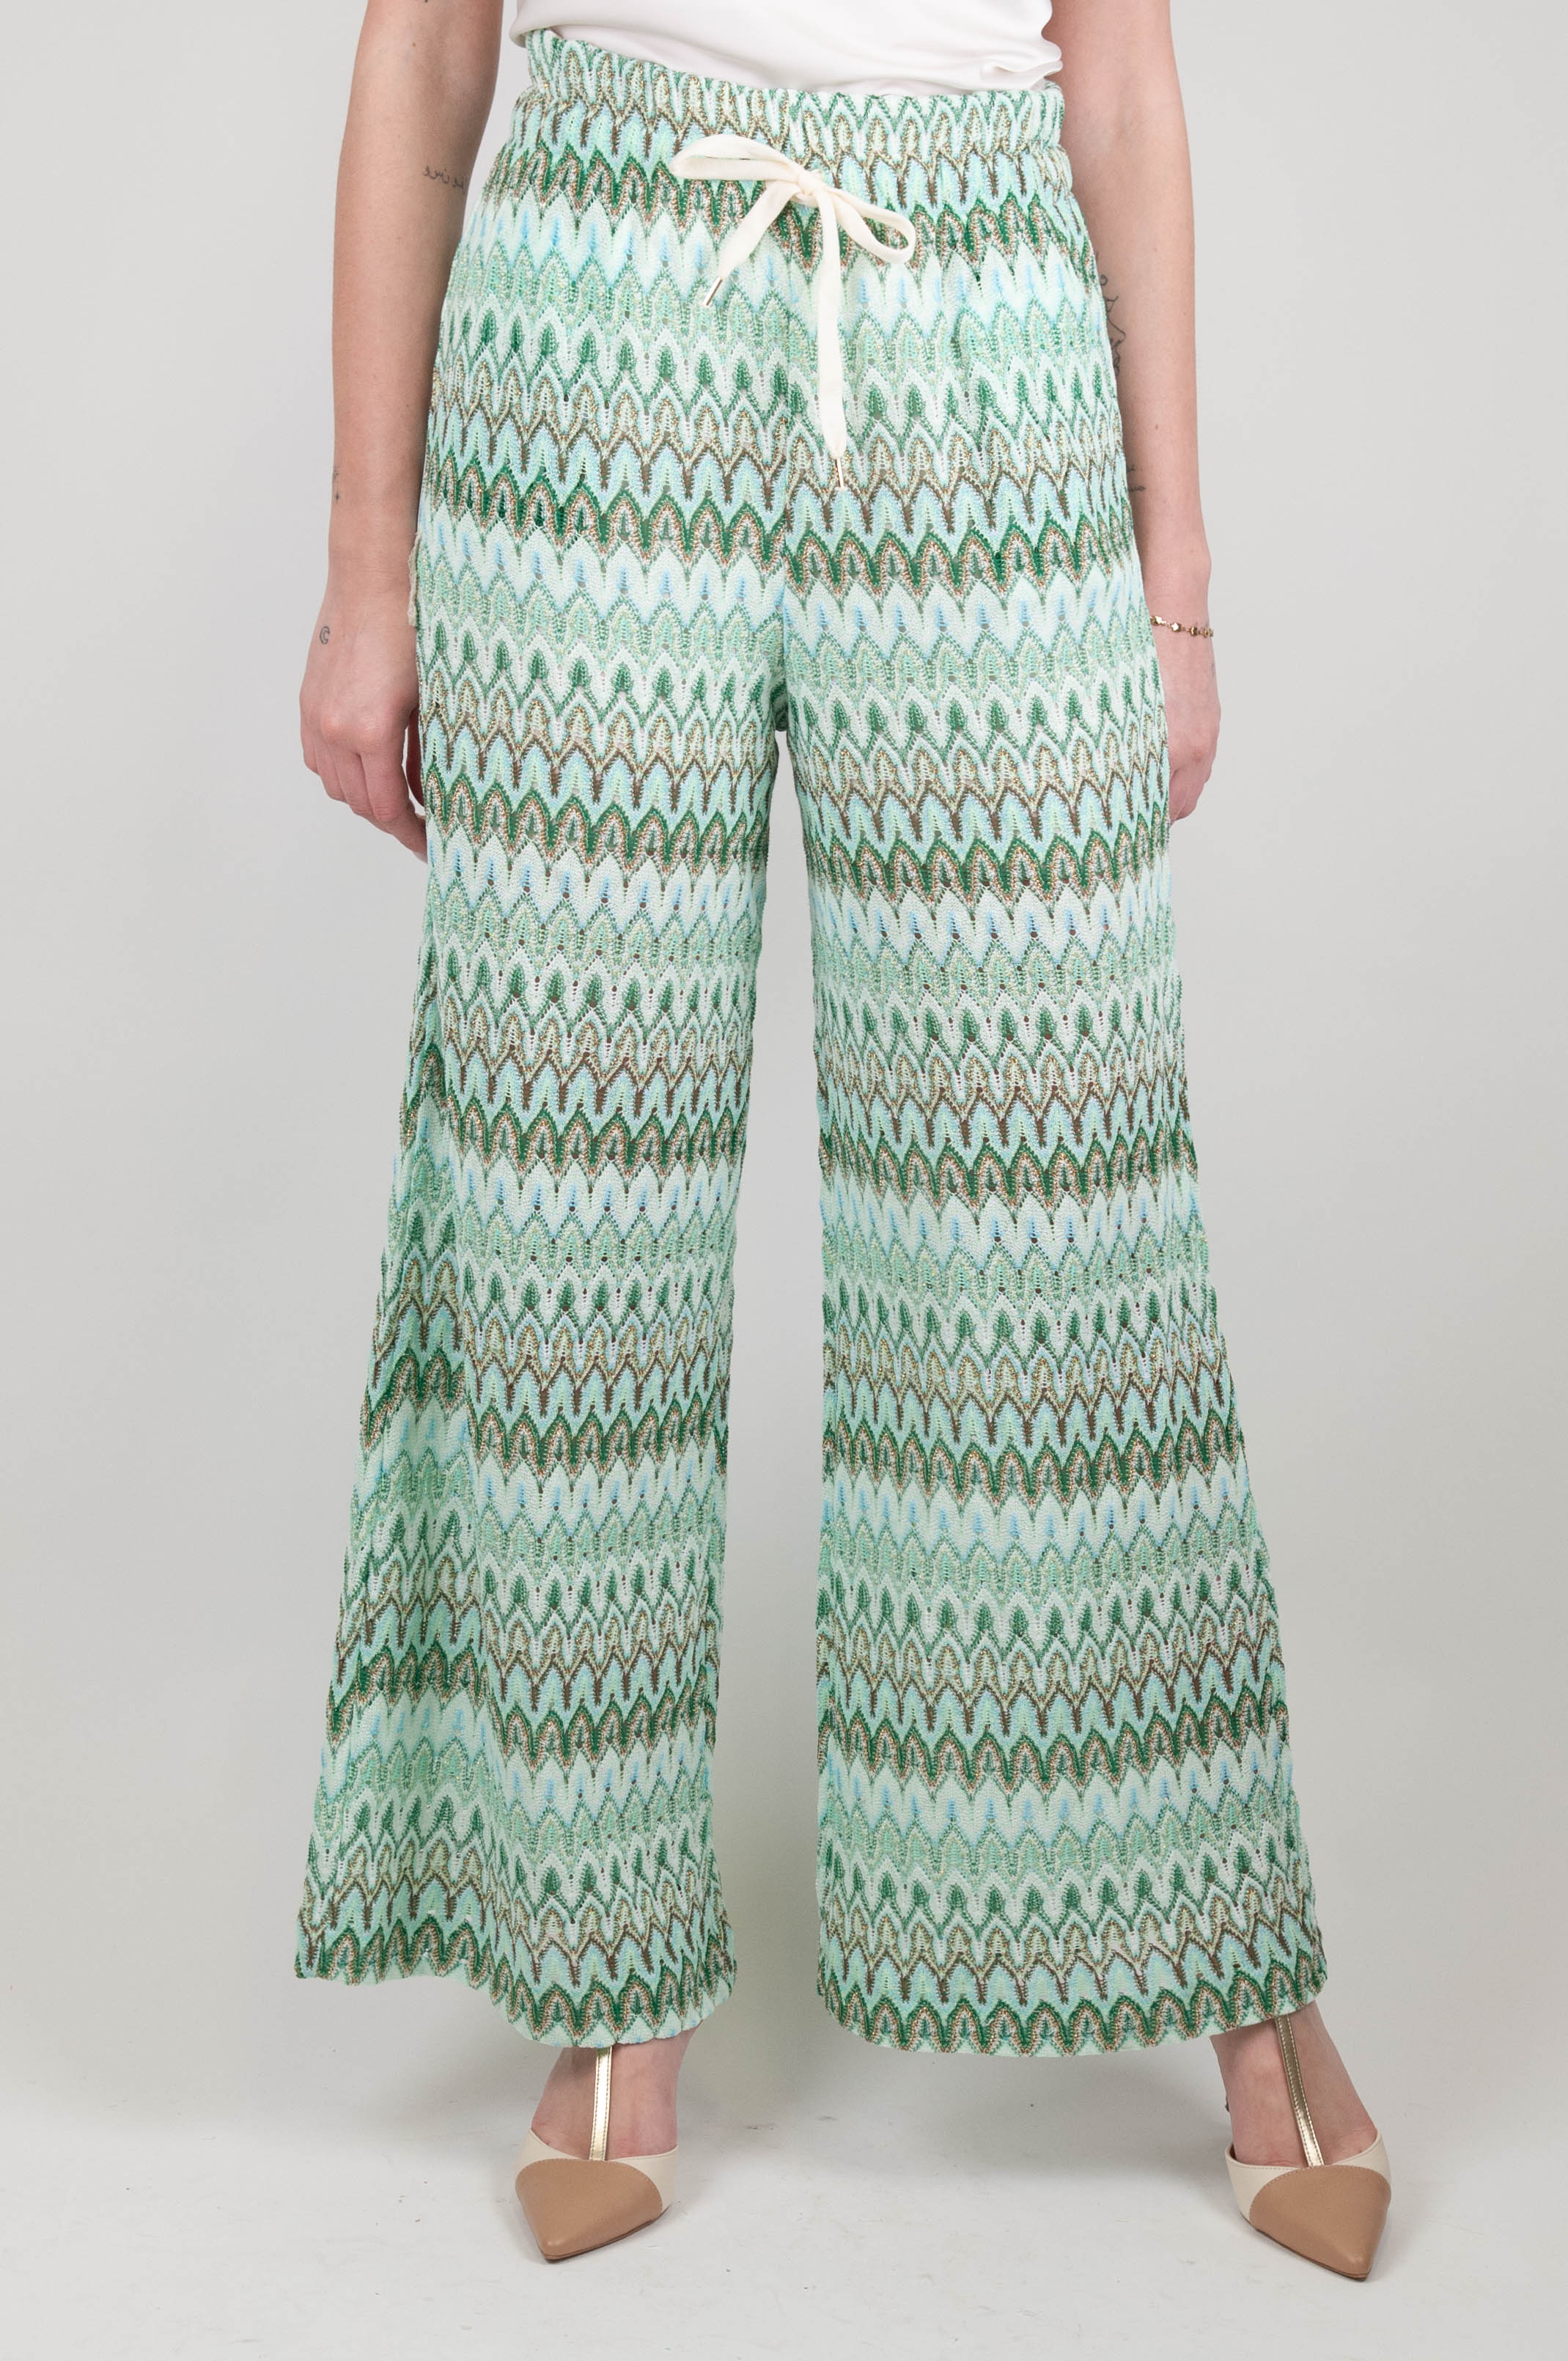 Tension in - Zig zag patterned palazzo trousers with drawstring